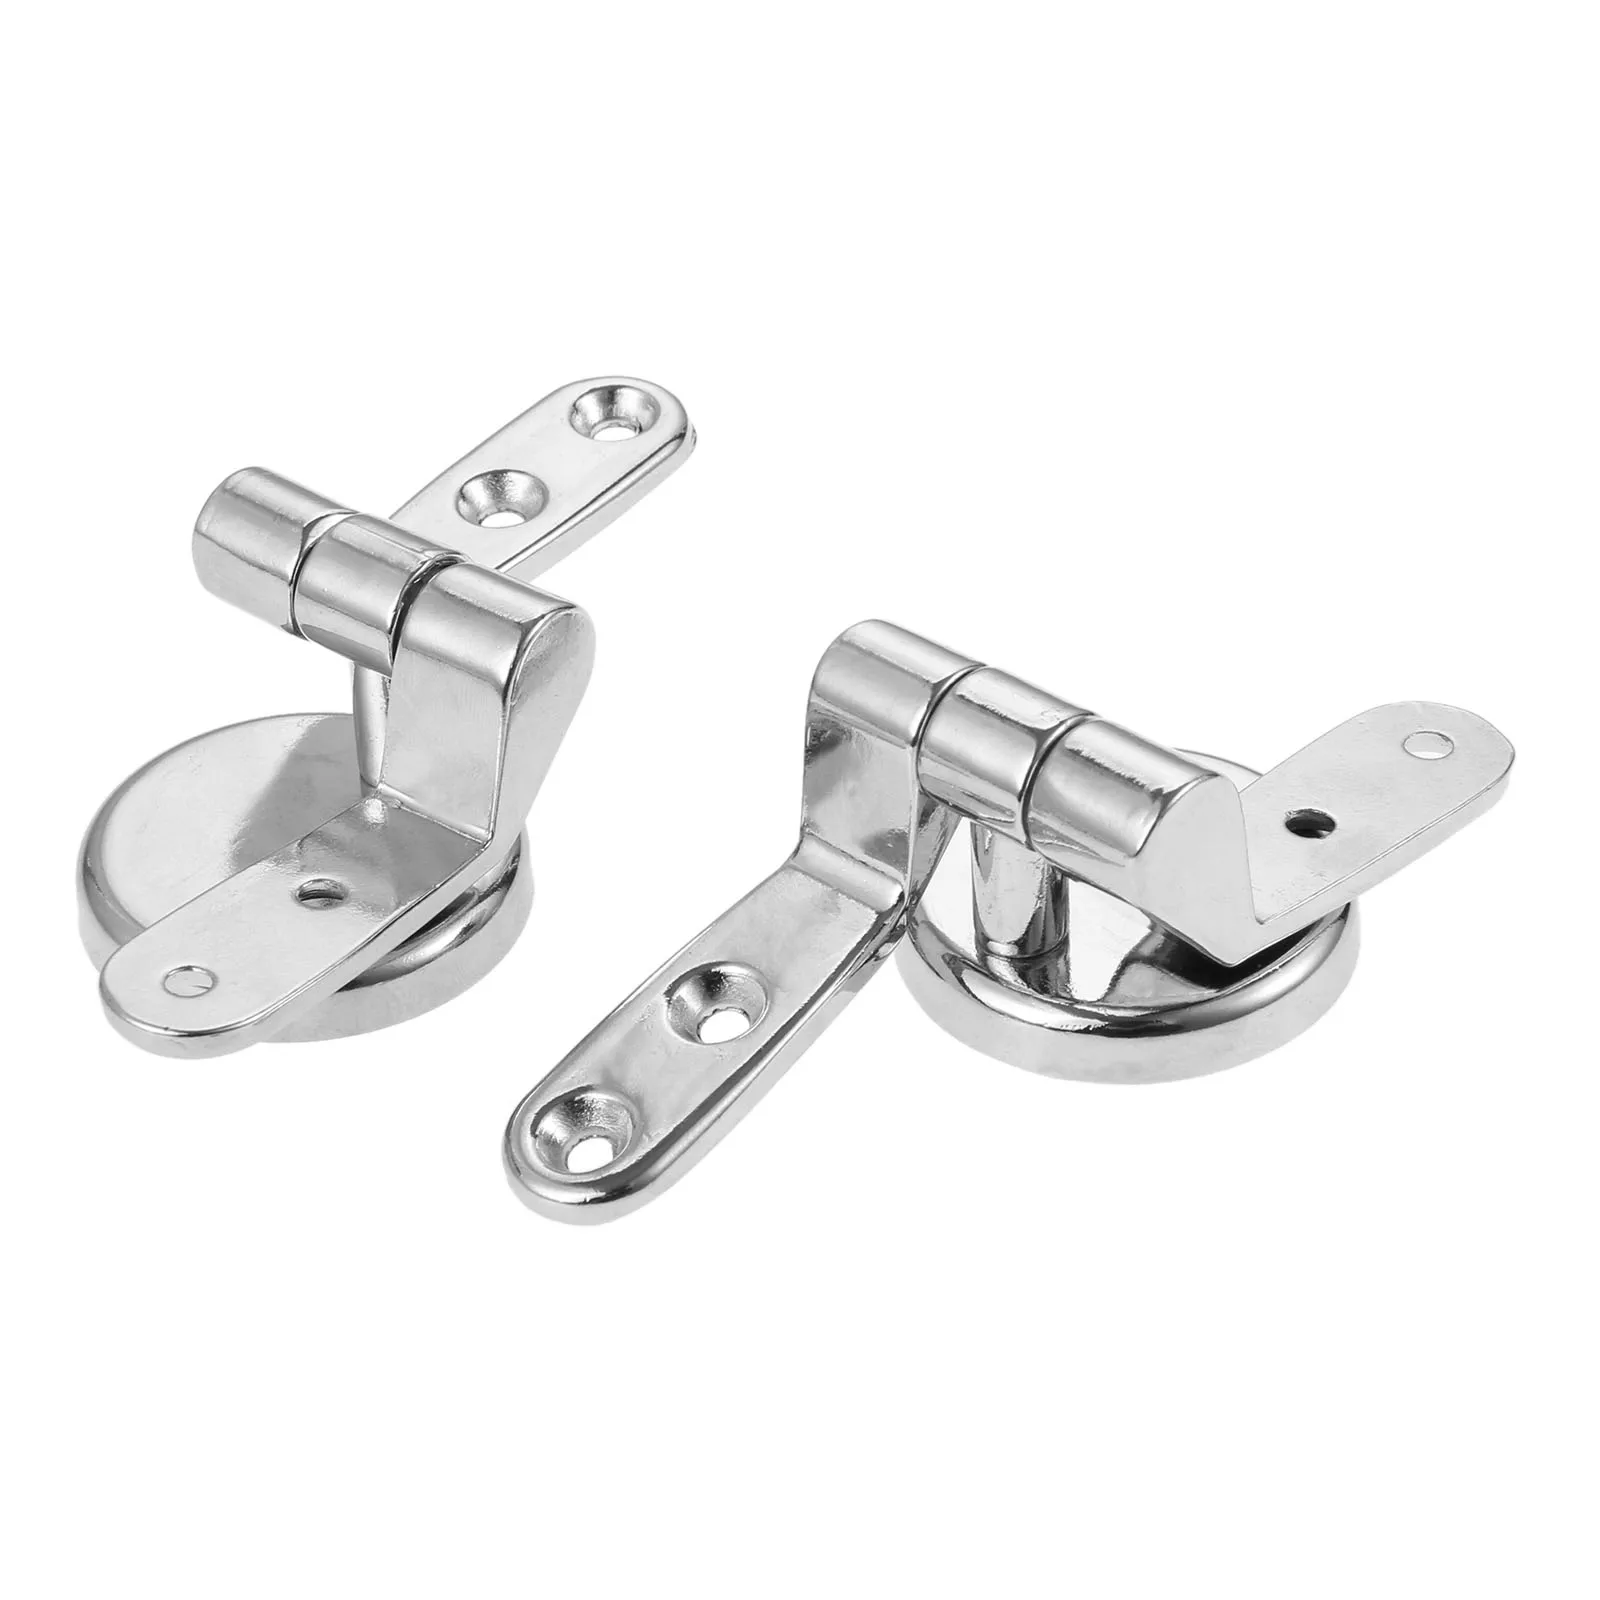 NEW Stainless Steel Toilet Seat Hinges L Shape Brackets Metal with Tools 